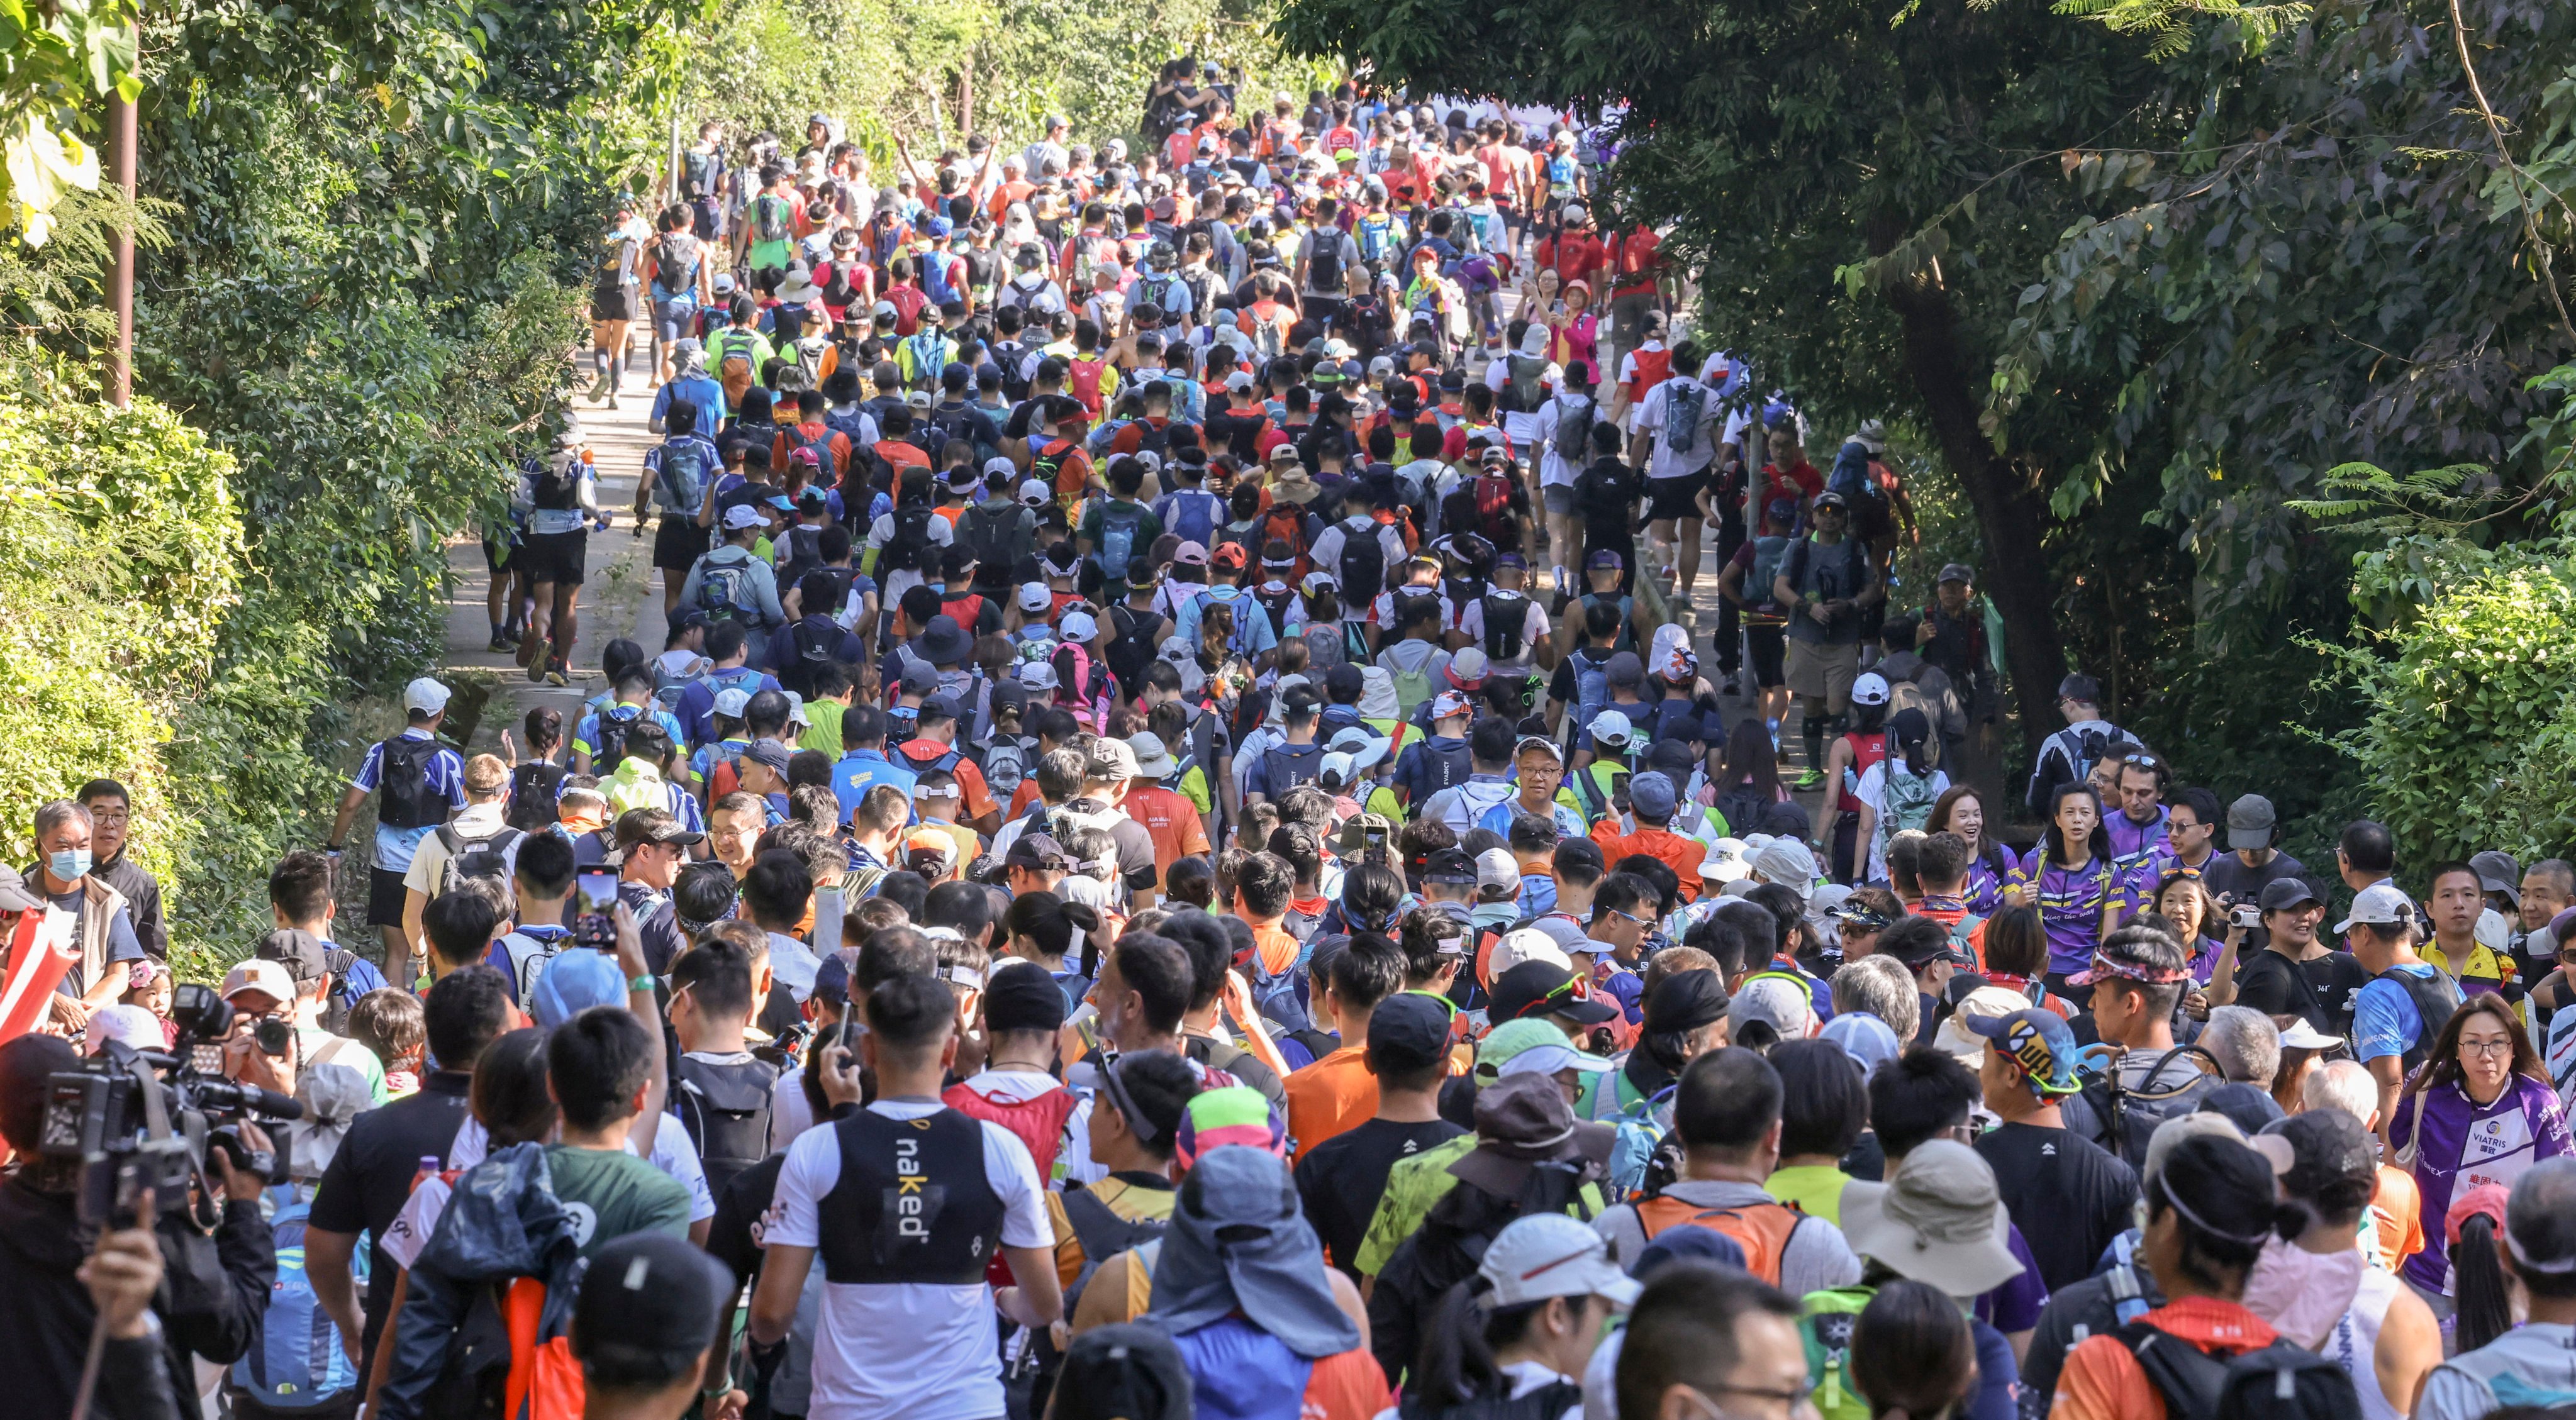 The 2023 Oxfam Trailwalker gets under way at Pak Tam Chung in Sai Kung. Photo: Dickson Lee